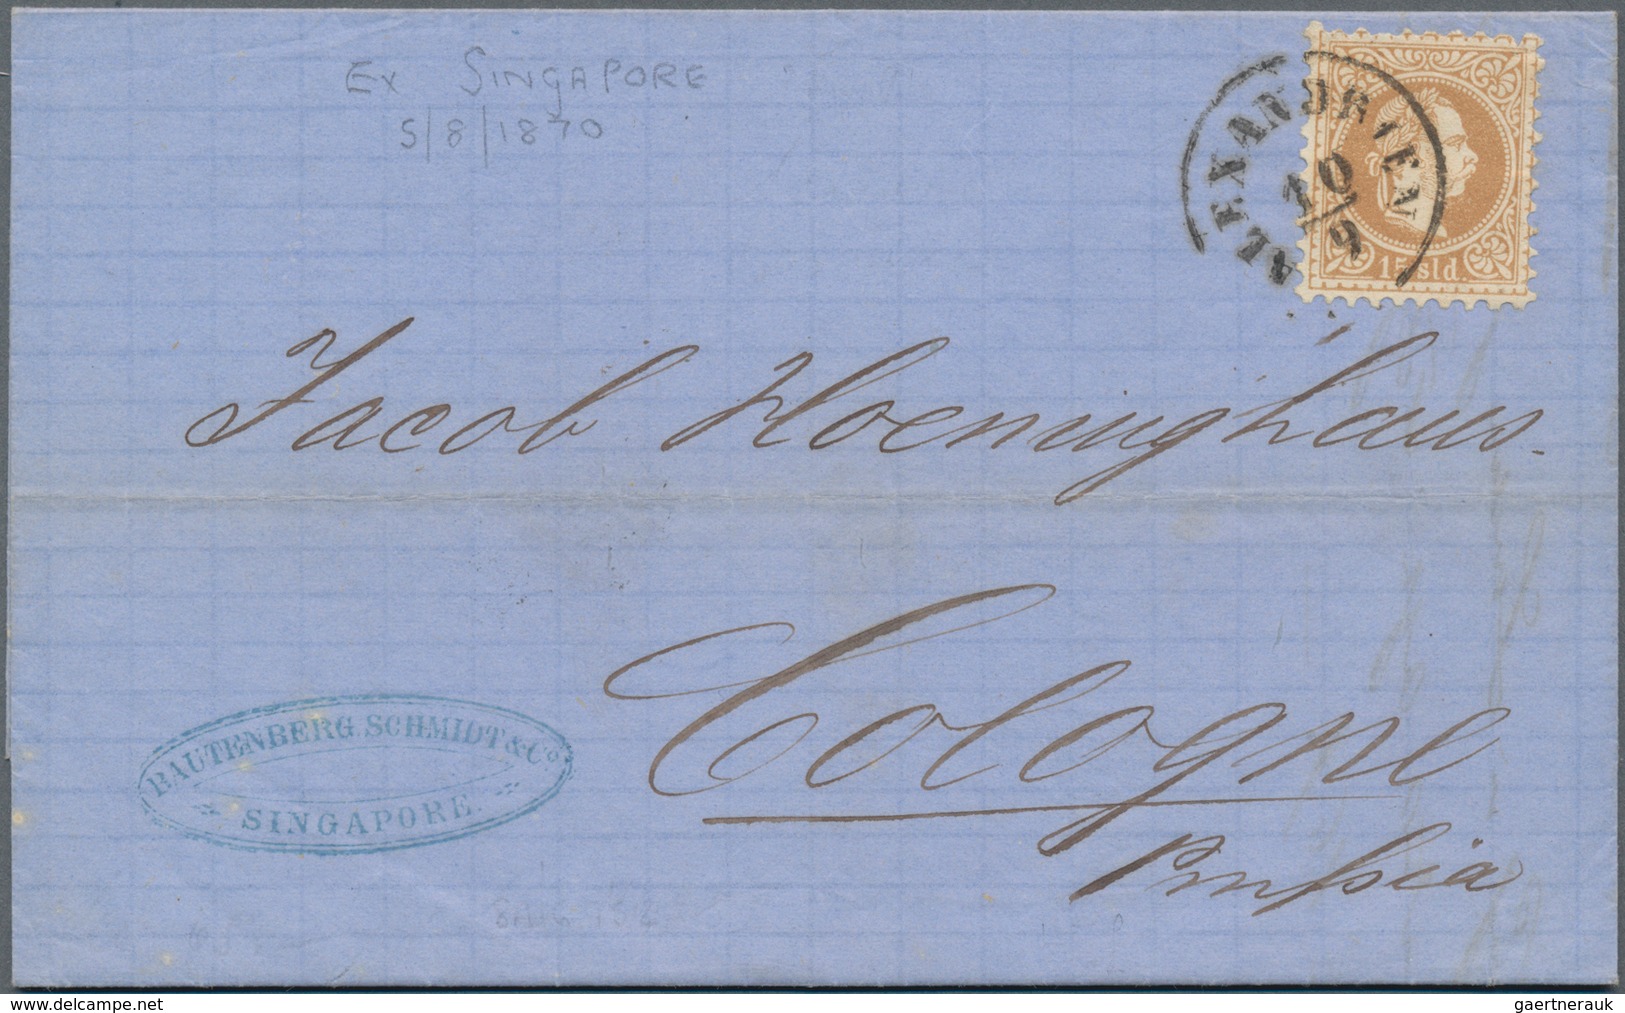 Singapur: 1870 Folded Letter From Singapore To Cologne, Germany Via Alexandria, Dated Inside 'Singap - Singapur (...-1959)